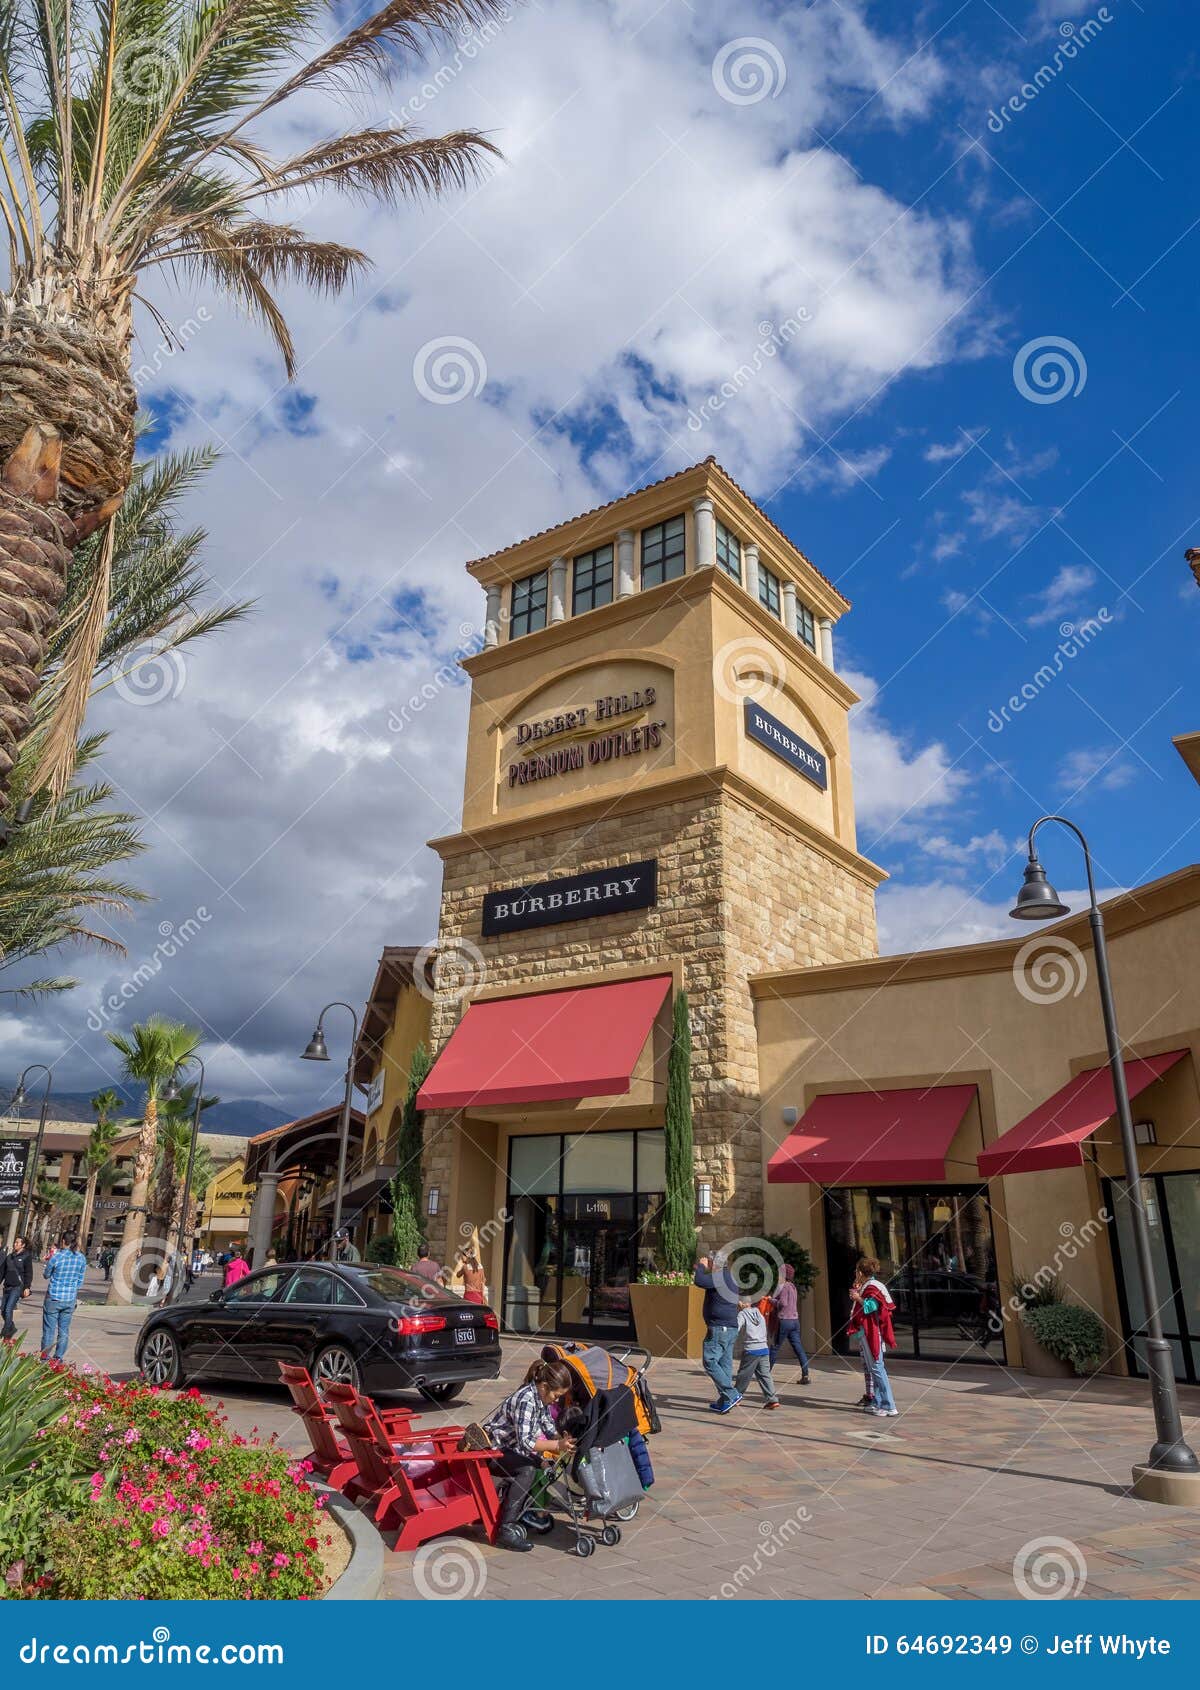 Desert Hills Premium Outlet Mall Editorial Stock Image - Image of hill, fashion: 64692349